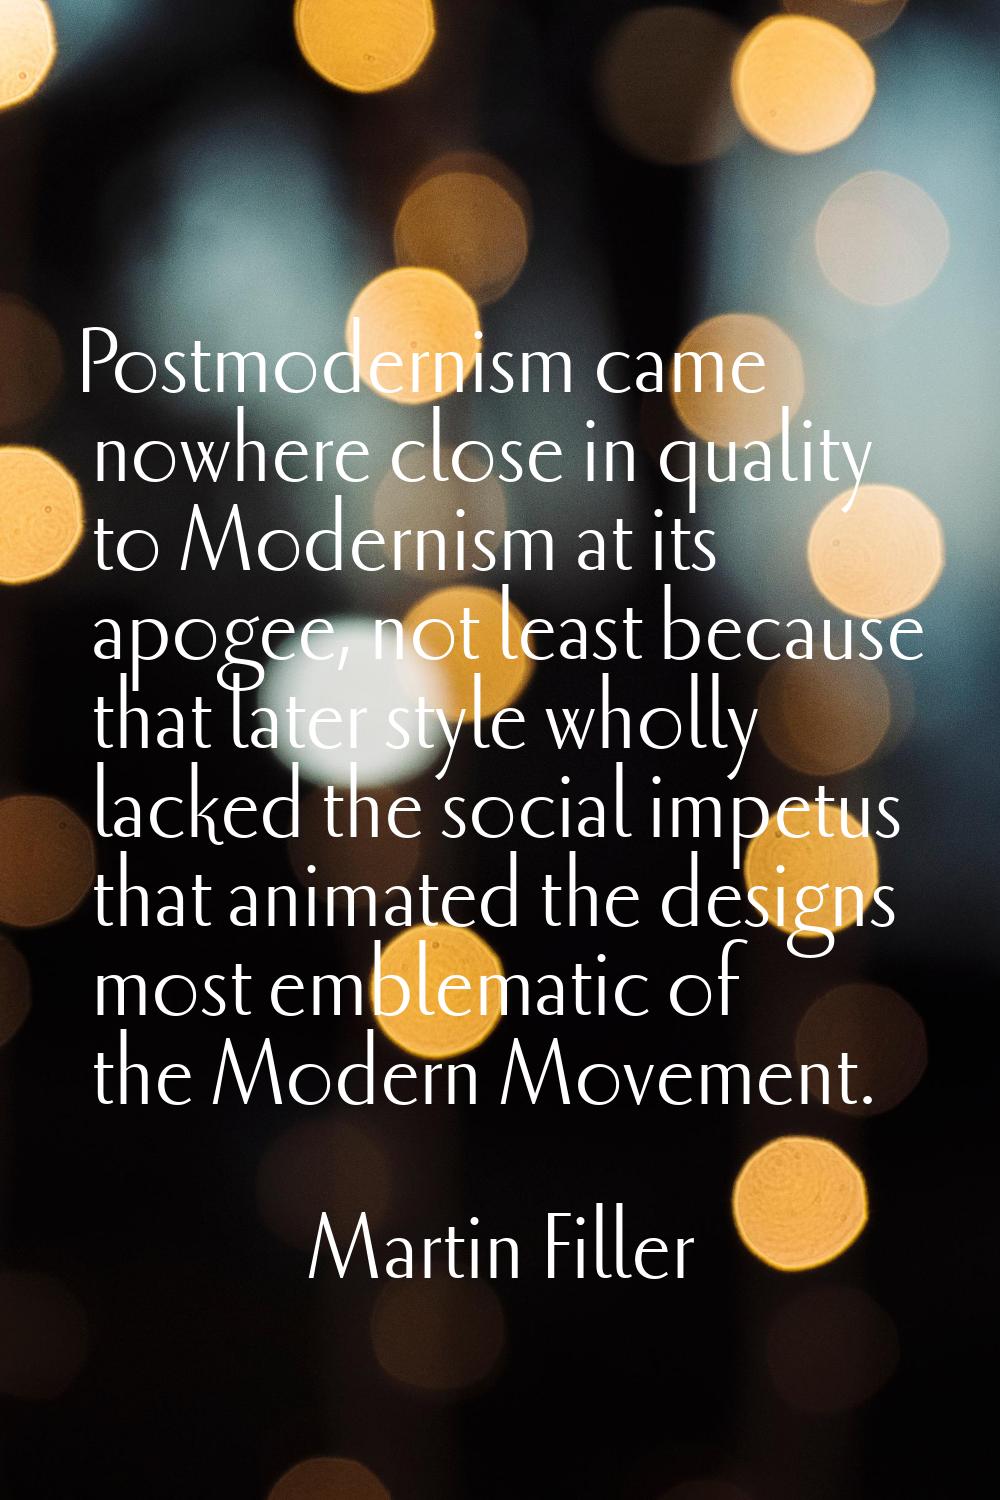 Postmodernism came nowhere close in quality to Modernism at its apogee, not least because that late